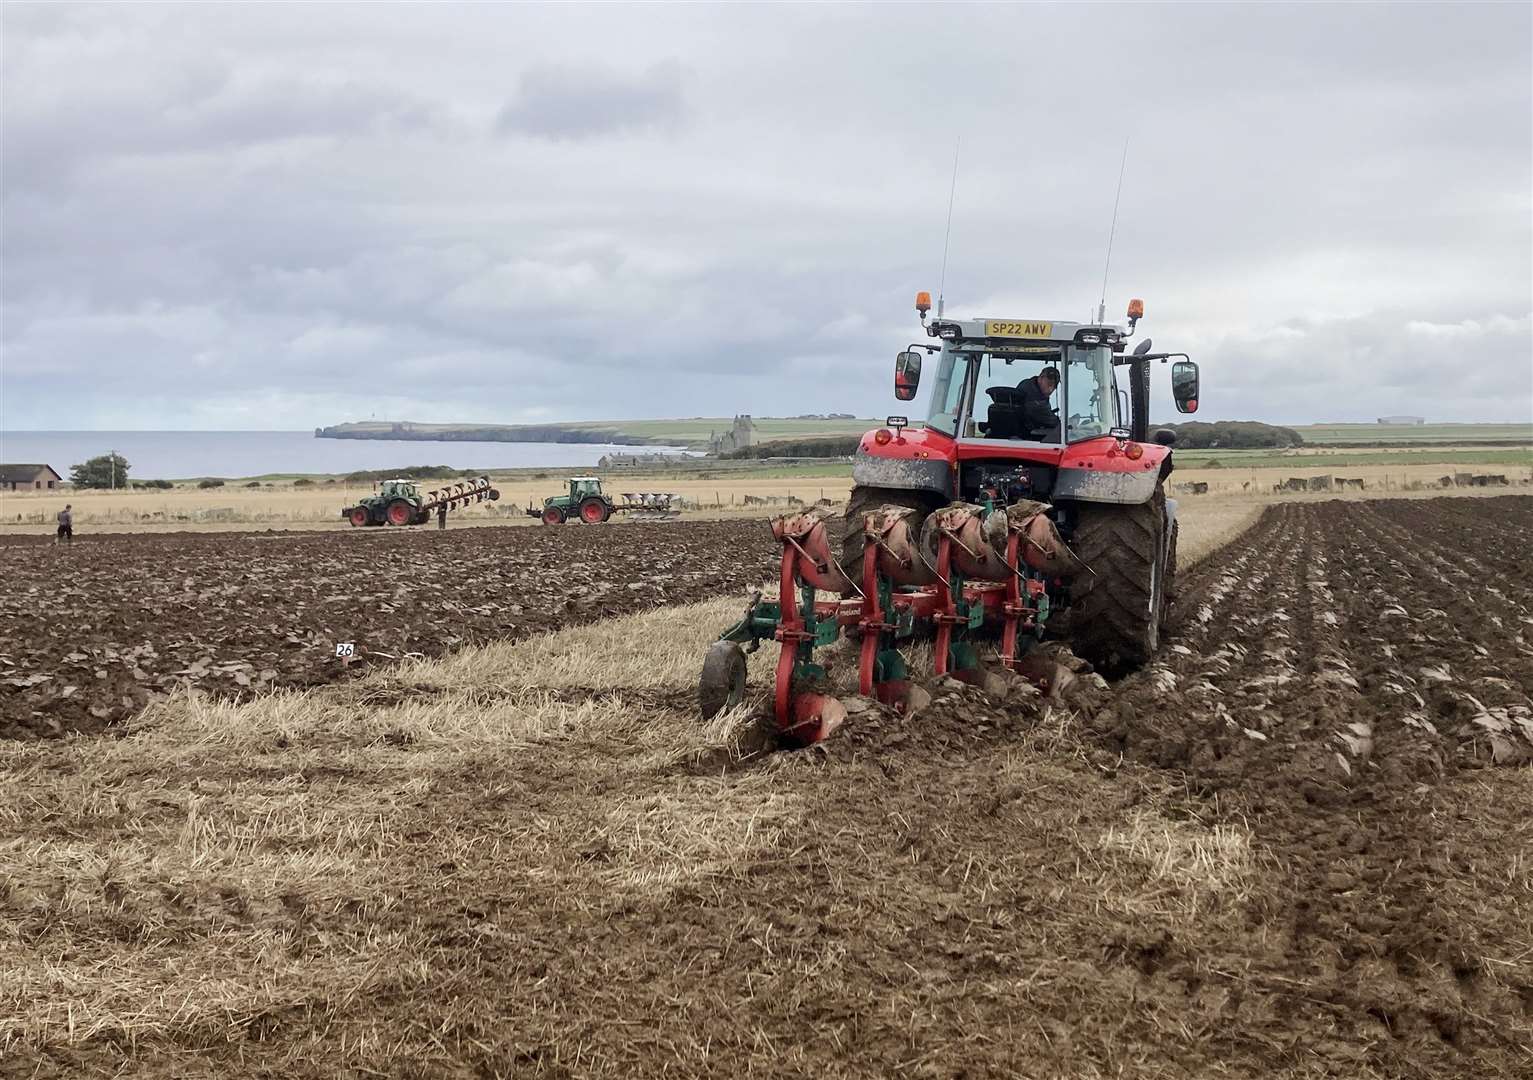 Scott Rosie keeping a close eye on his work during Latheron Parish Ploughing Association’s annual ploughing match at Reiss Lodge on Sunday.